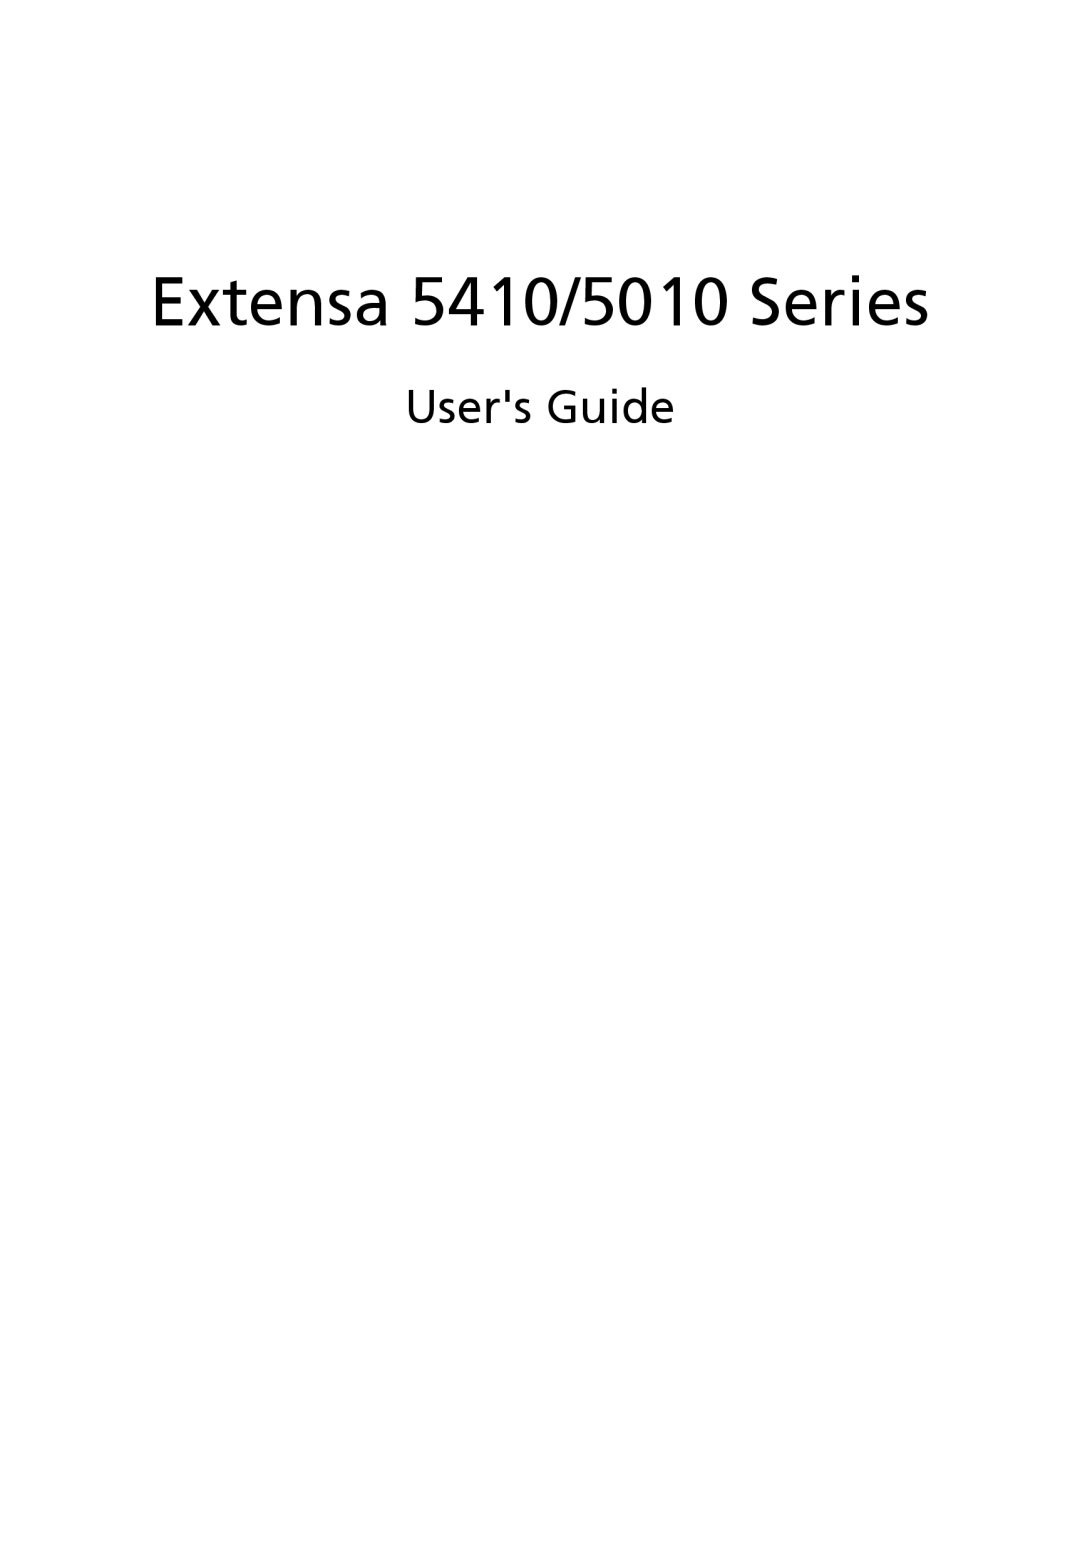 Acer 5410 Series manual Users Guide, Extensa 5410/5010 Series 